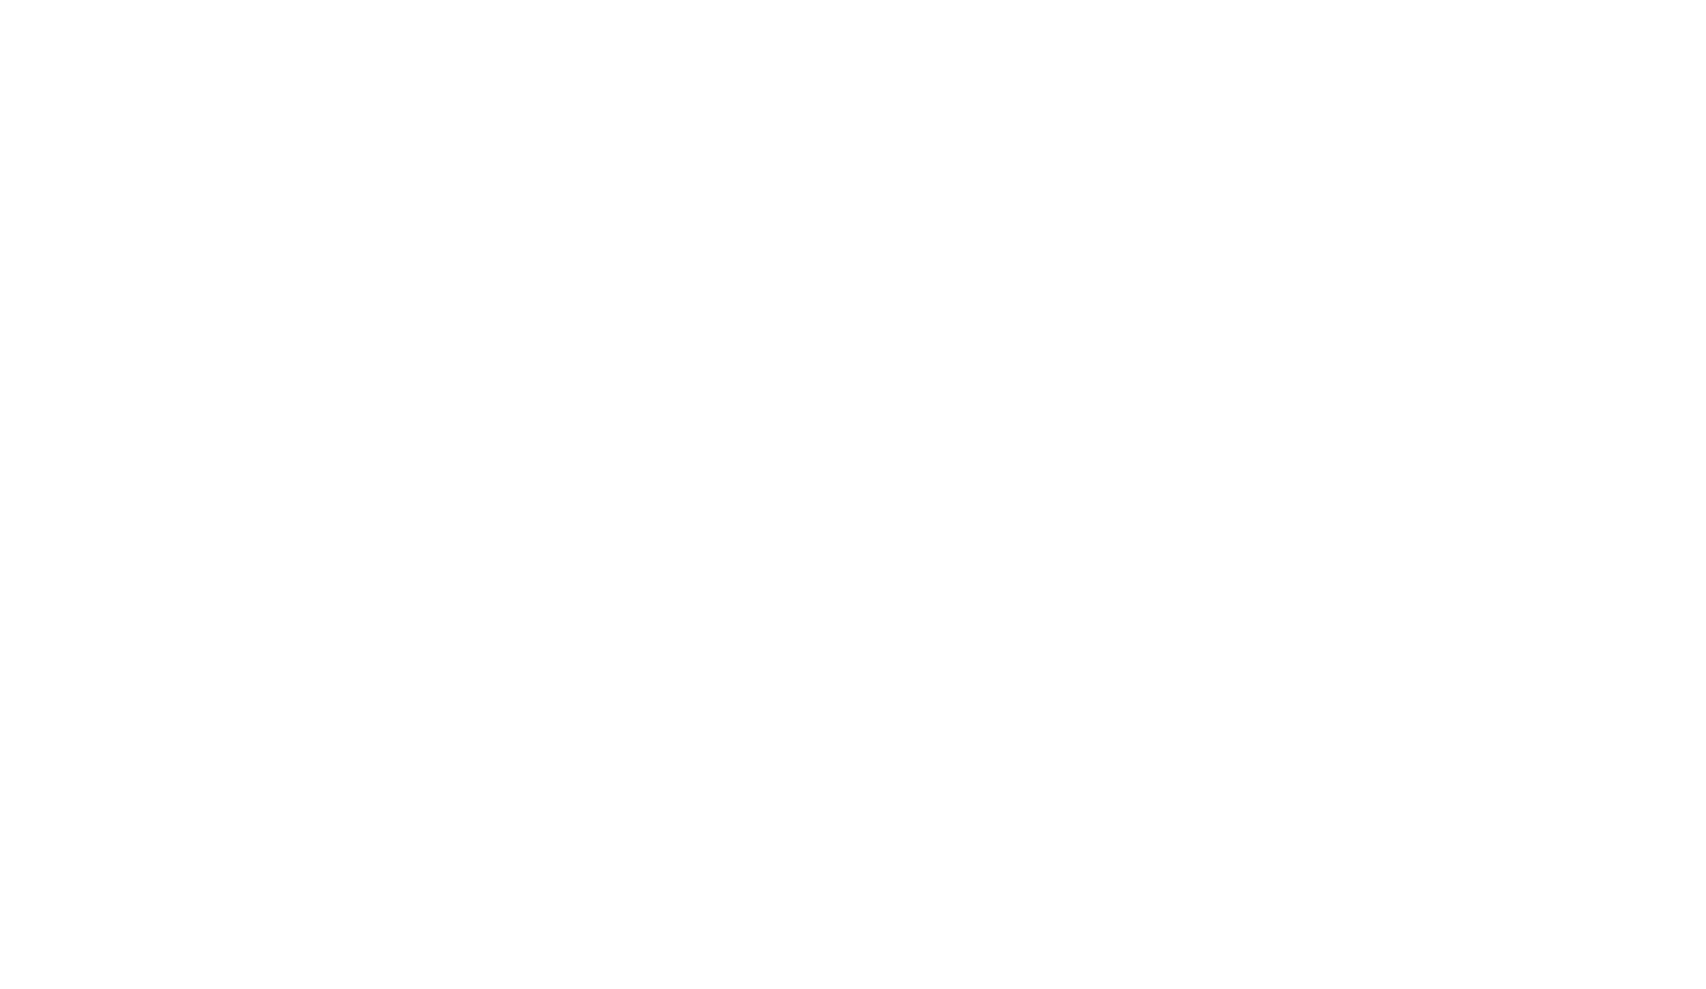 The CIPS MENA Conference & Excellence in Procurement Awards logo